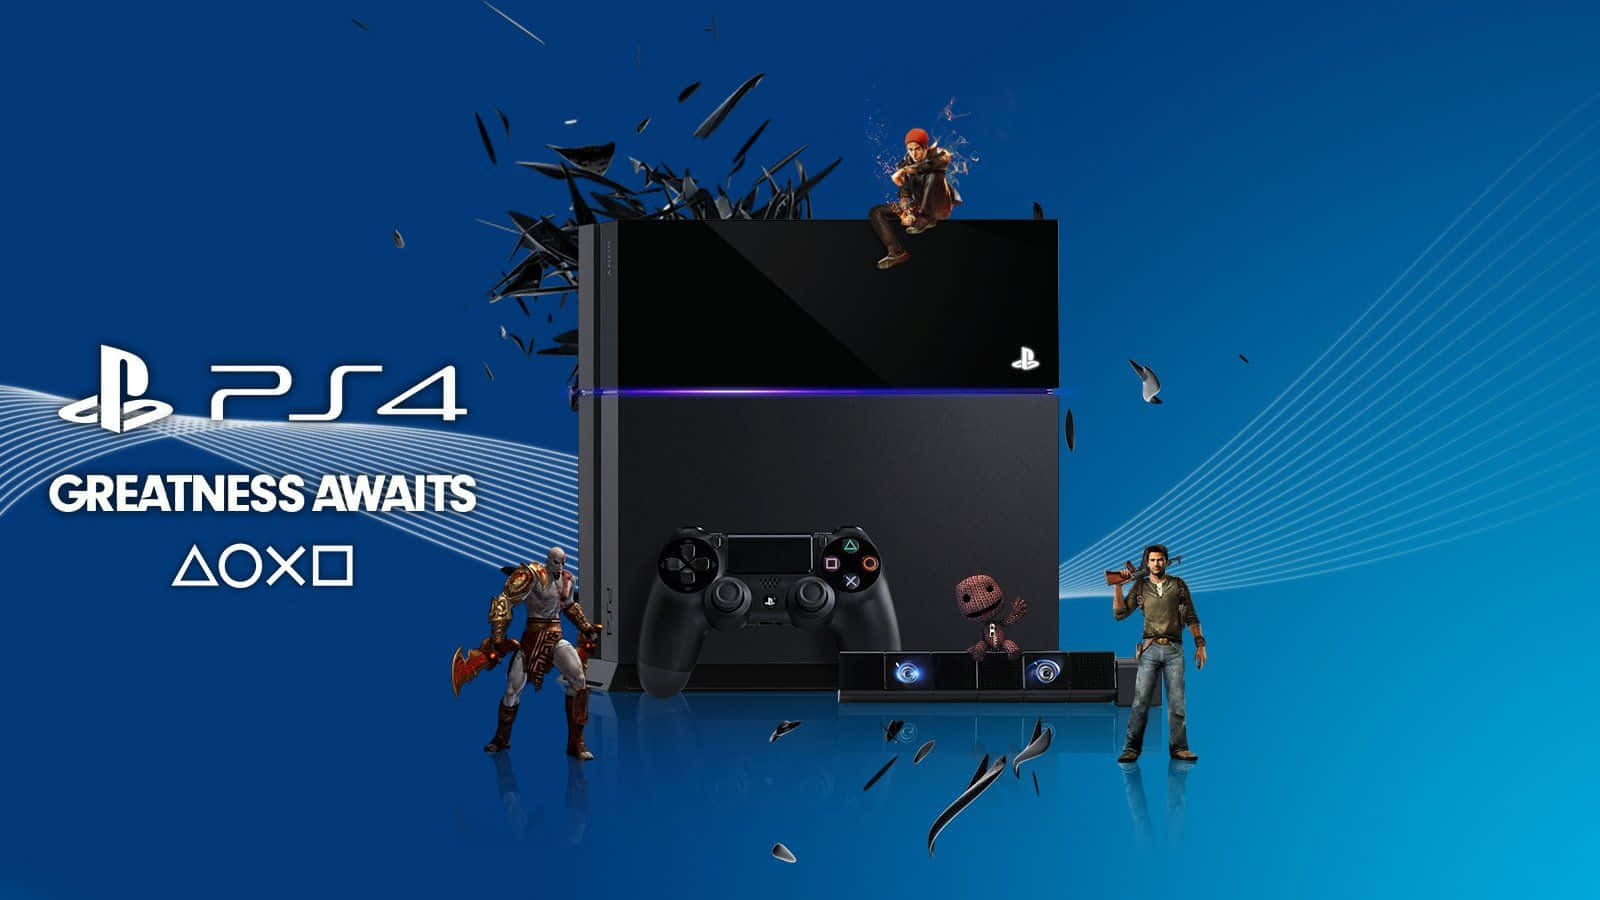 Cool Ps4 Game Characters Surrounding Console With Quotes Background